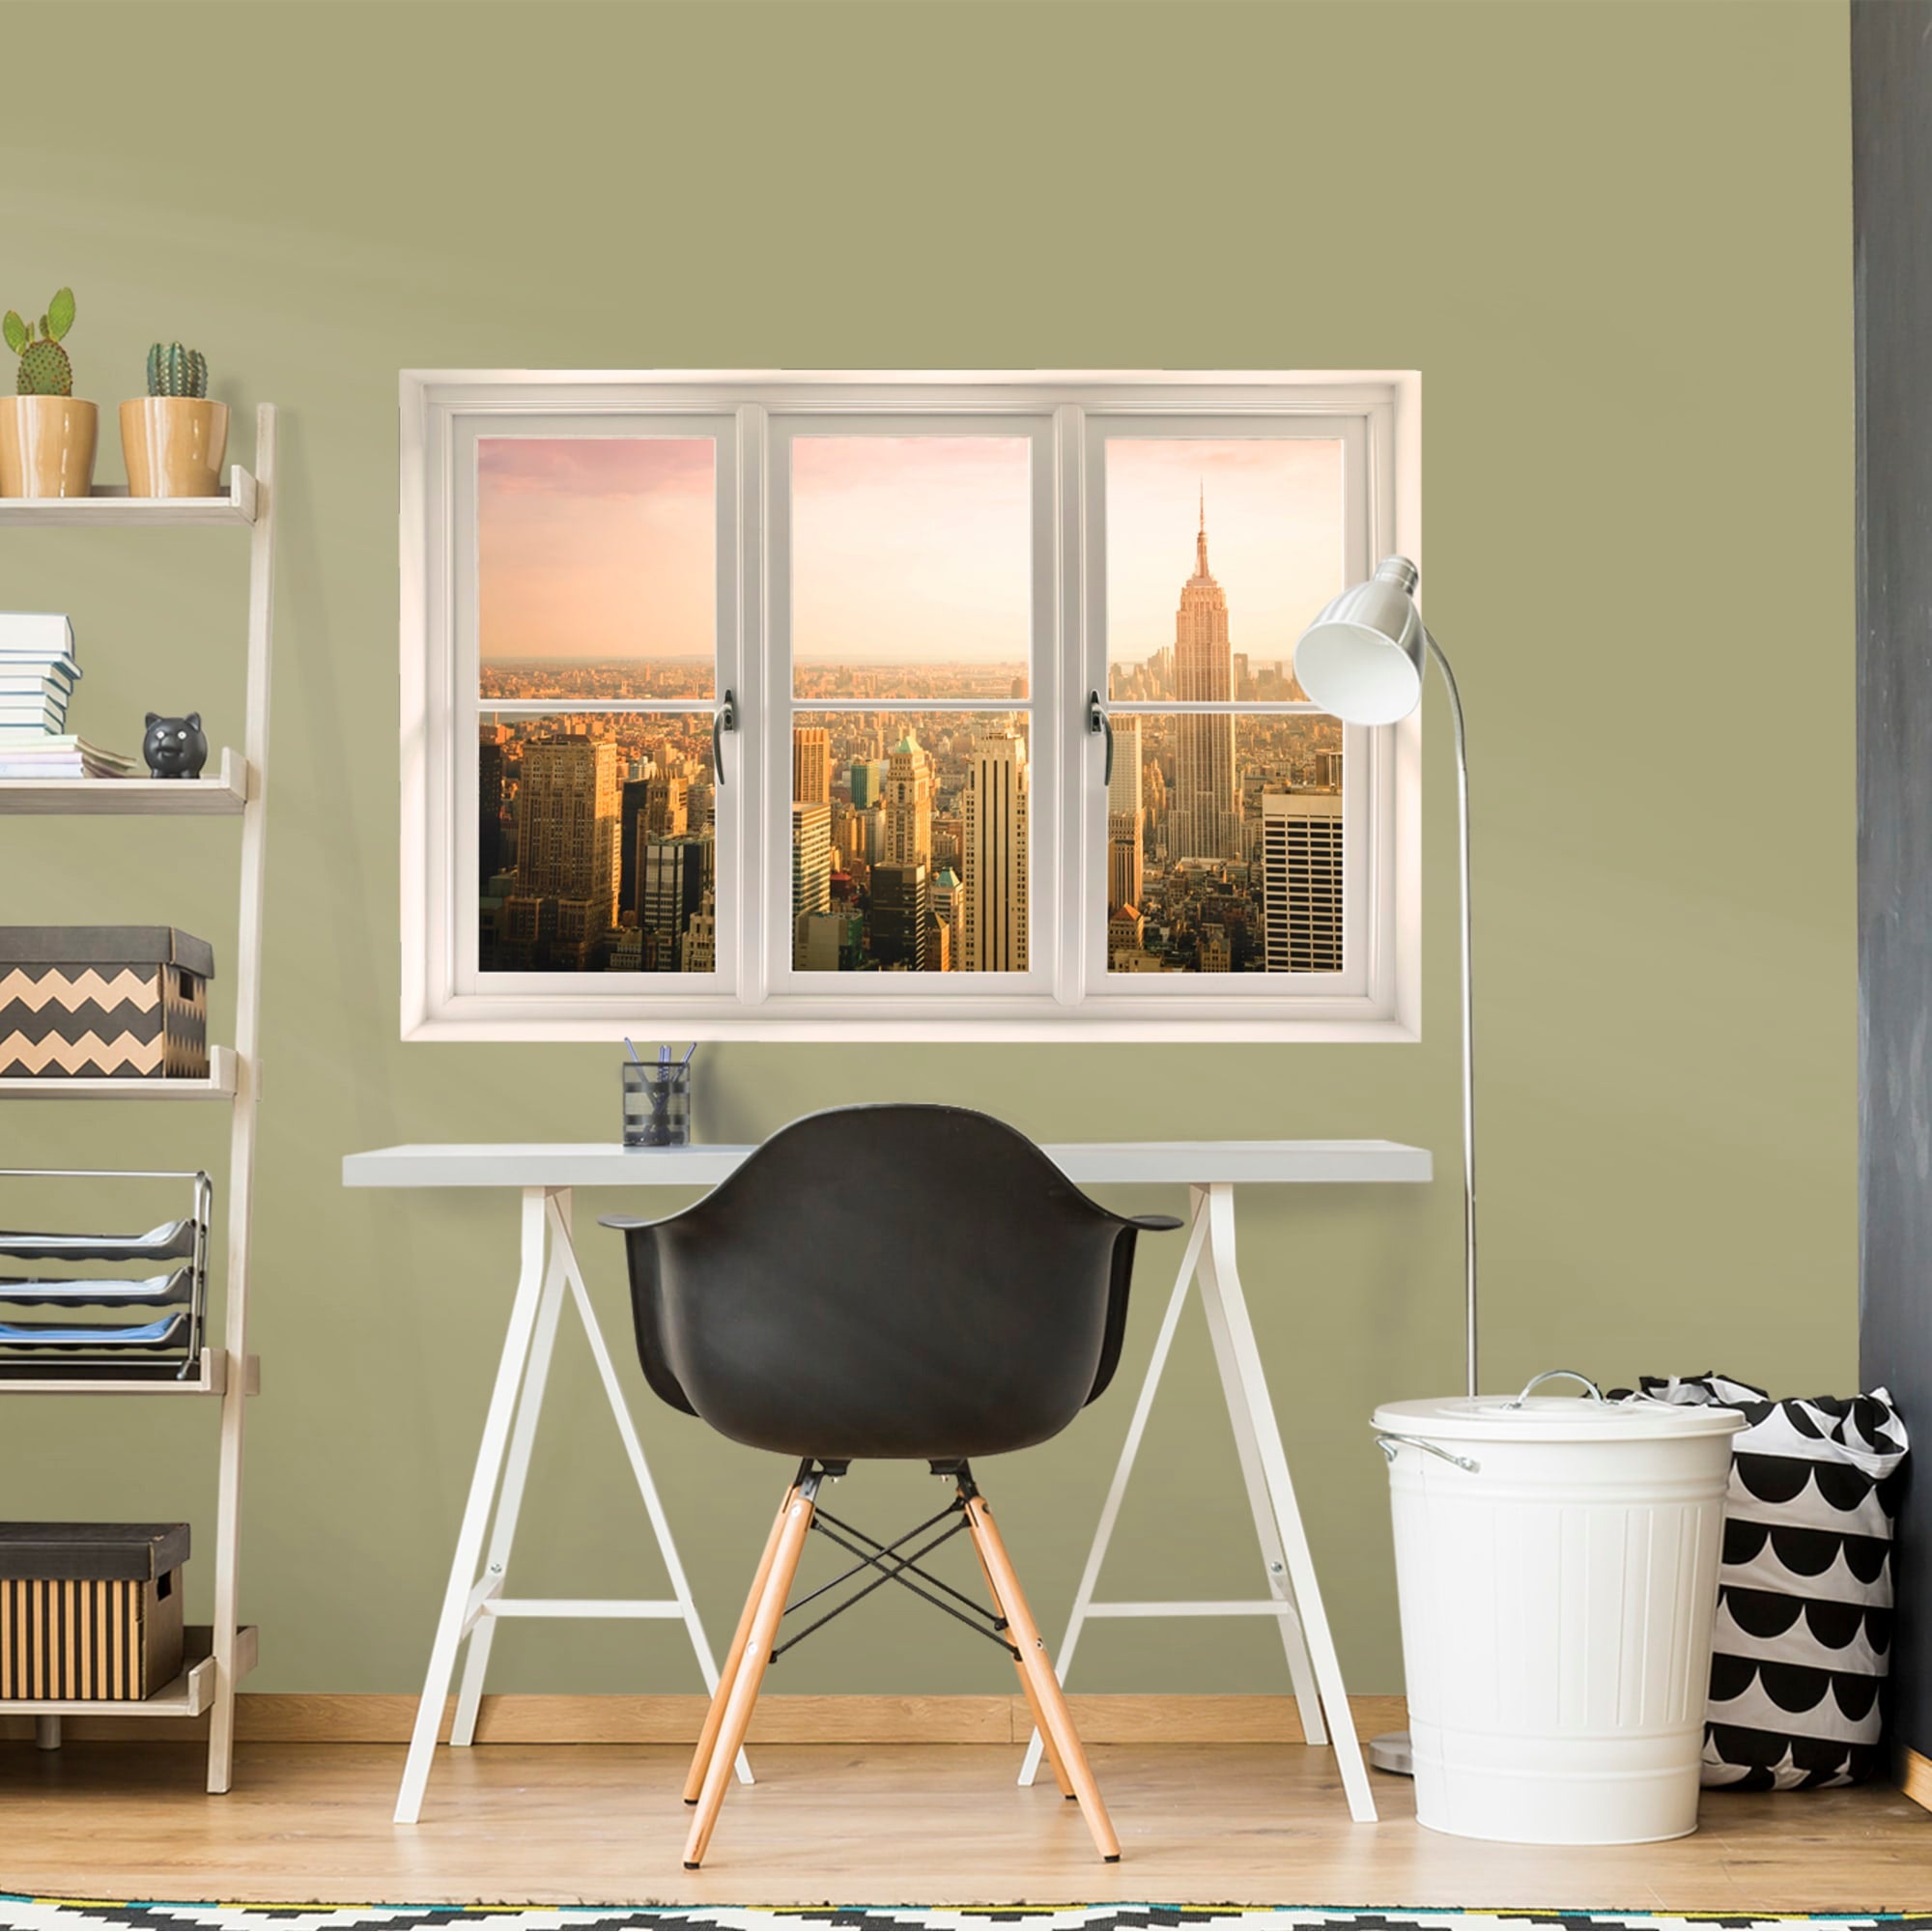 Instant Window: Empire State Building - Removable Wall Graphic 51.0"W x 34.0"H by Fathead | Vinyl